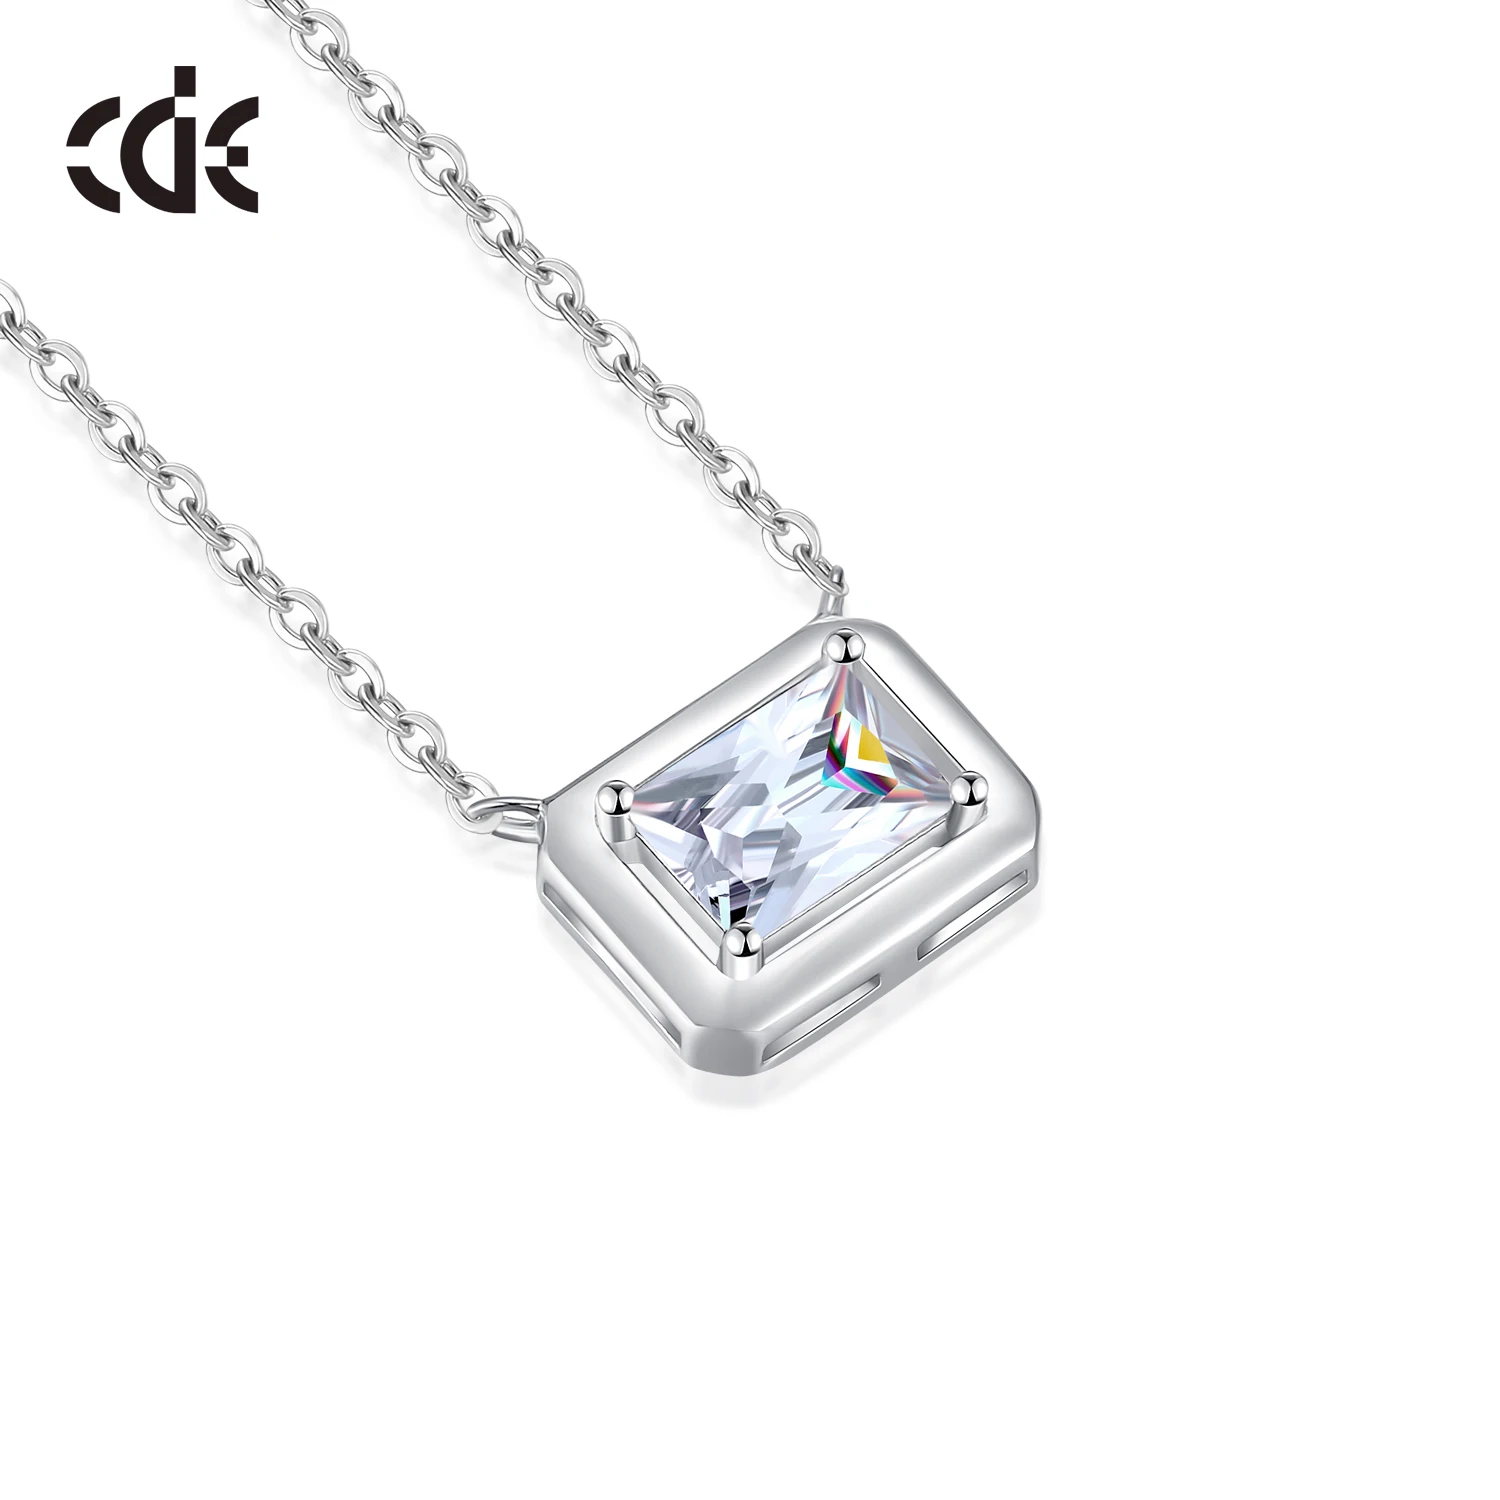 CDE YN1181 Fine 925 Sterling Silver Jewelry 5A Cubic Zirconia Charm Necklace Wholesale Rhodium Plated Pendant Necklace